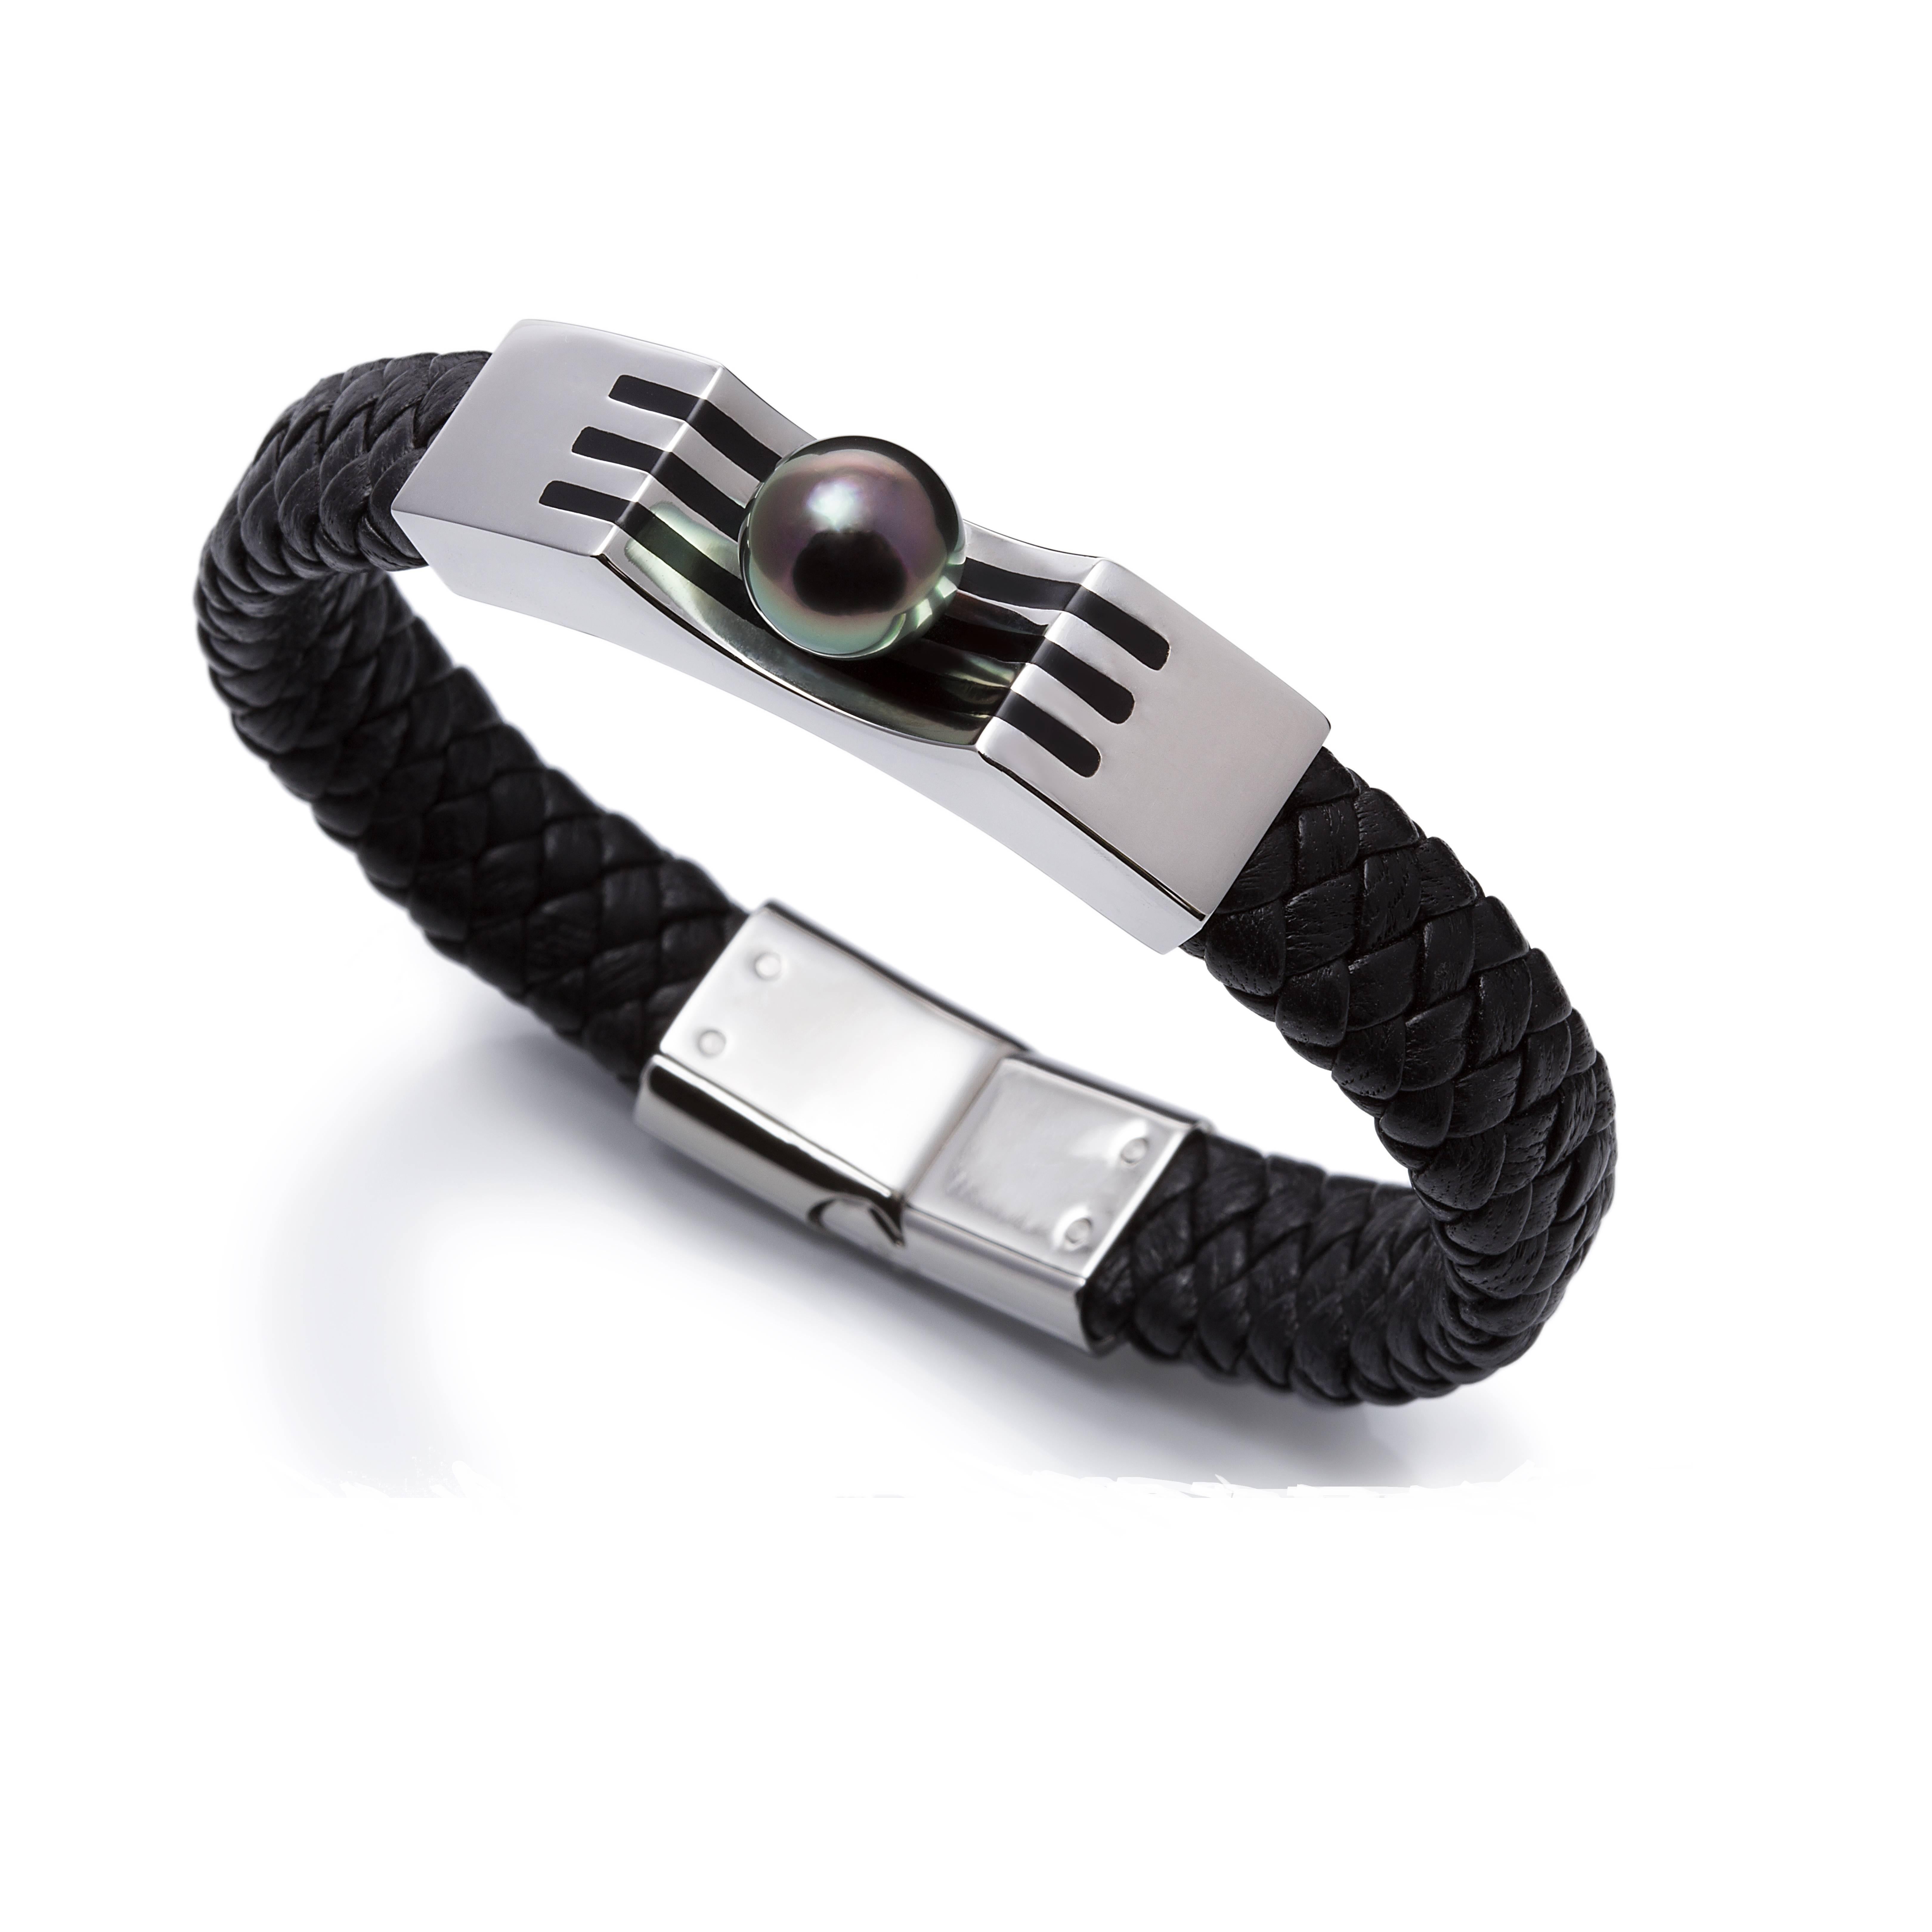 For the Men...

Men's bracelet of steel and plaited leather....

Featuring a Tahitian round pearl, 0.43in / 11-12mm diameter, round in shape very high luster with bright peacock color.
The bracelet has very easy to use and secure steel magnetic